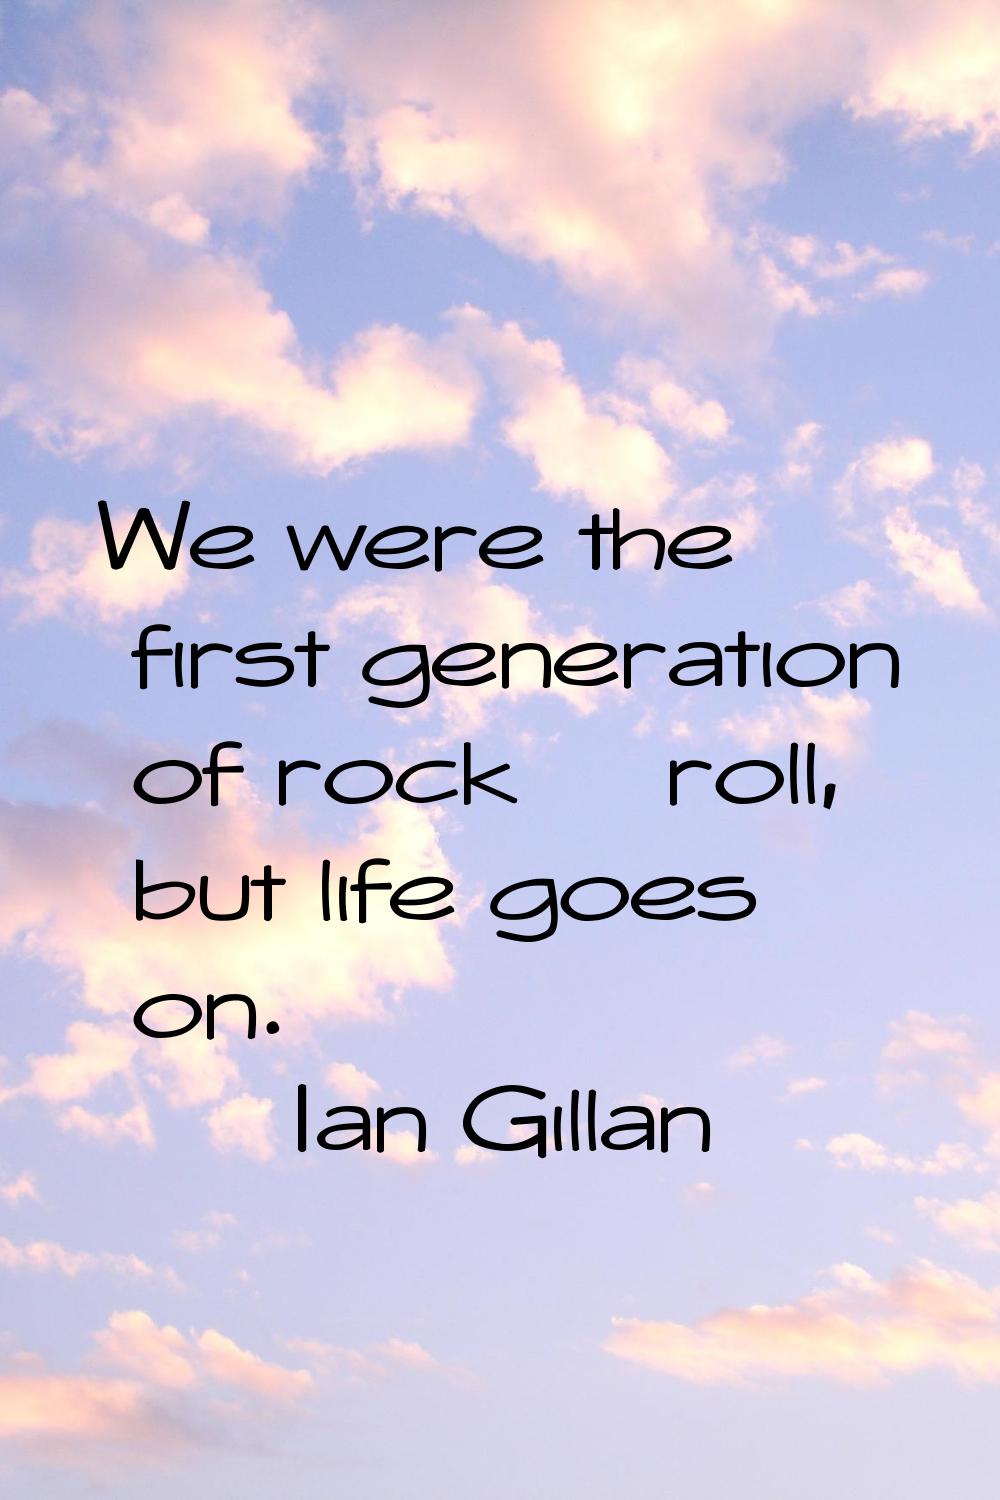 We were the first generation of rock & roll, but life goes on.